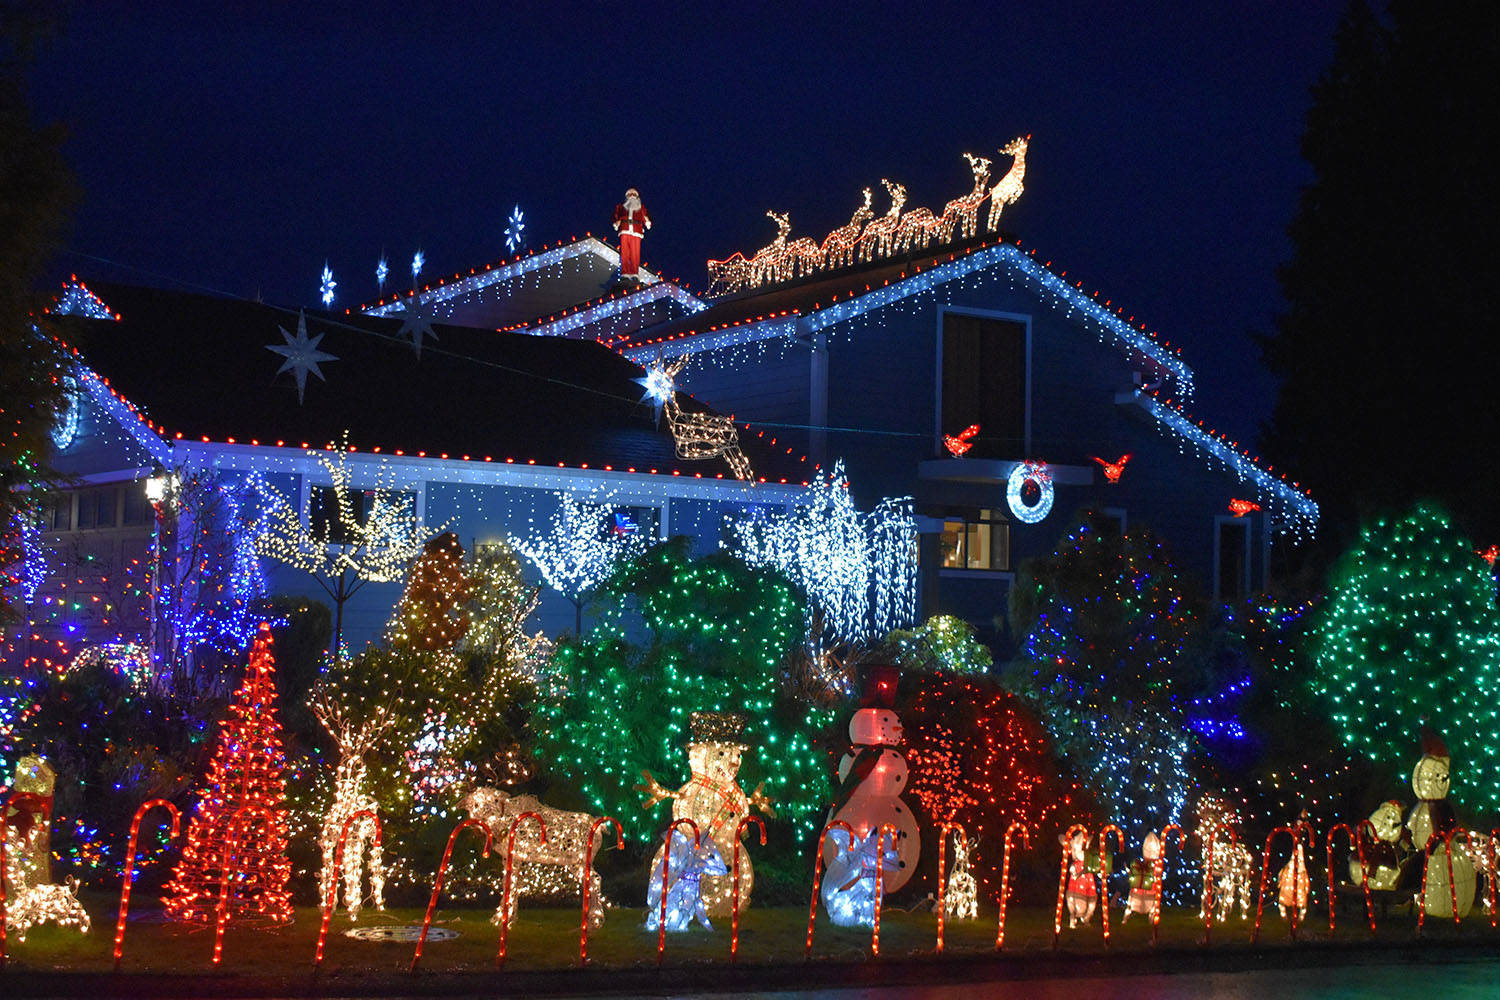 23654669_web1_201216-PNR-CHRISTMAS-DECORATED-HOUSE-STAND-ALONE-HOUSE_3